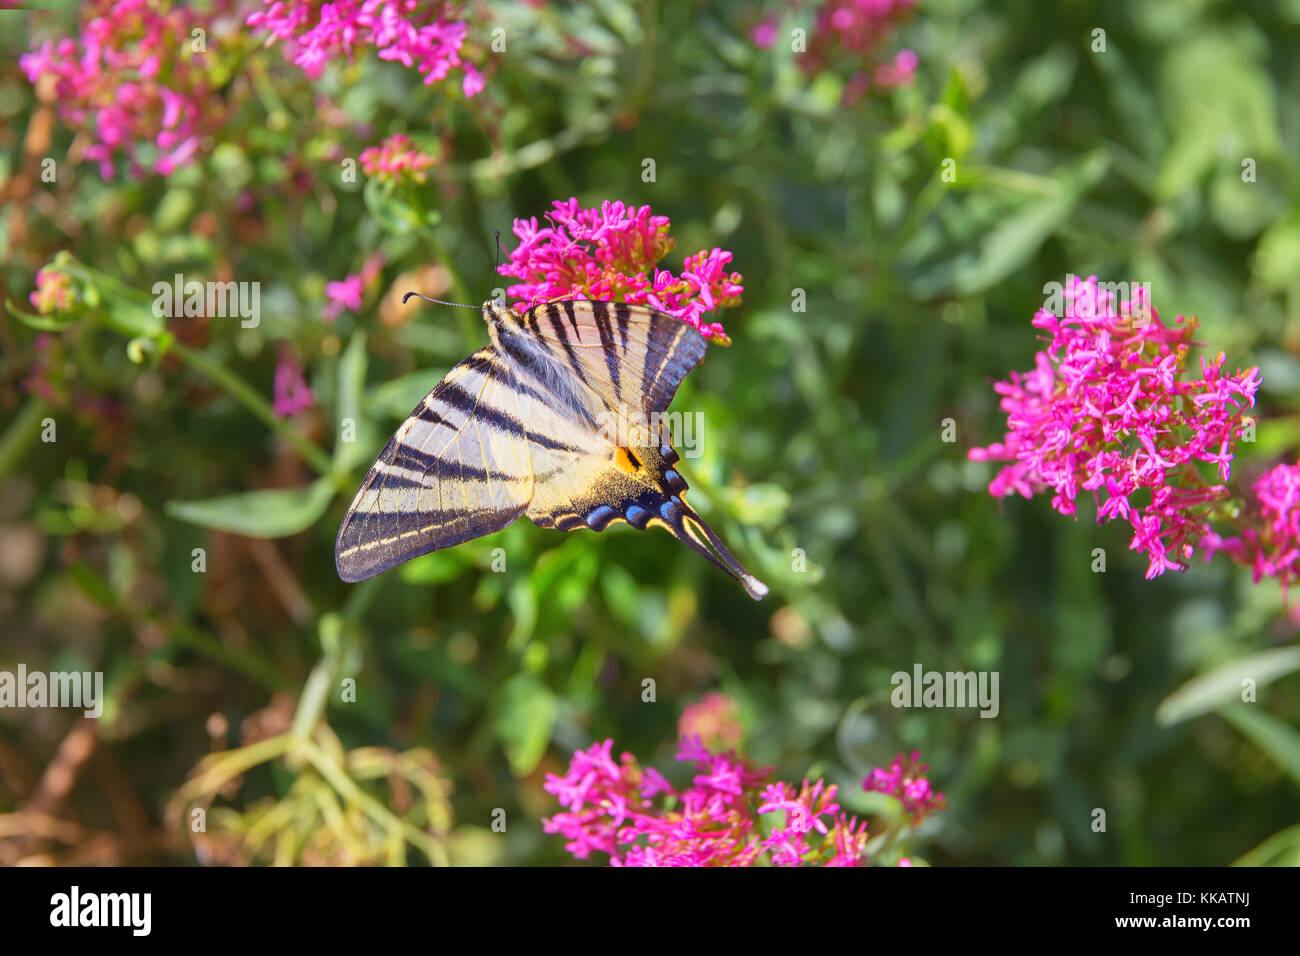 Scarce swallowtail butterfly (Iphiclides podalirius) flying over flowers, Vernazza, Cinque Terre, Liguria, Italy, Europe Stock Photo